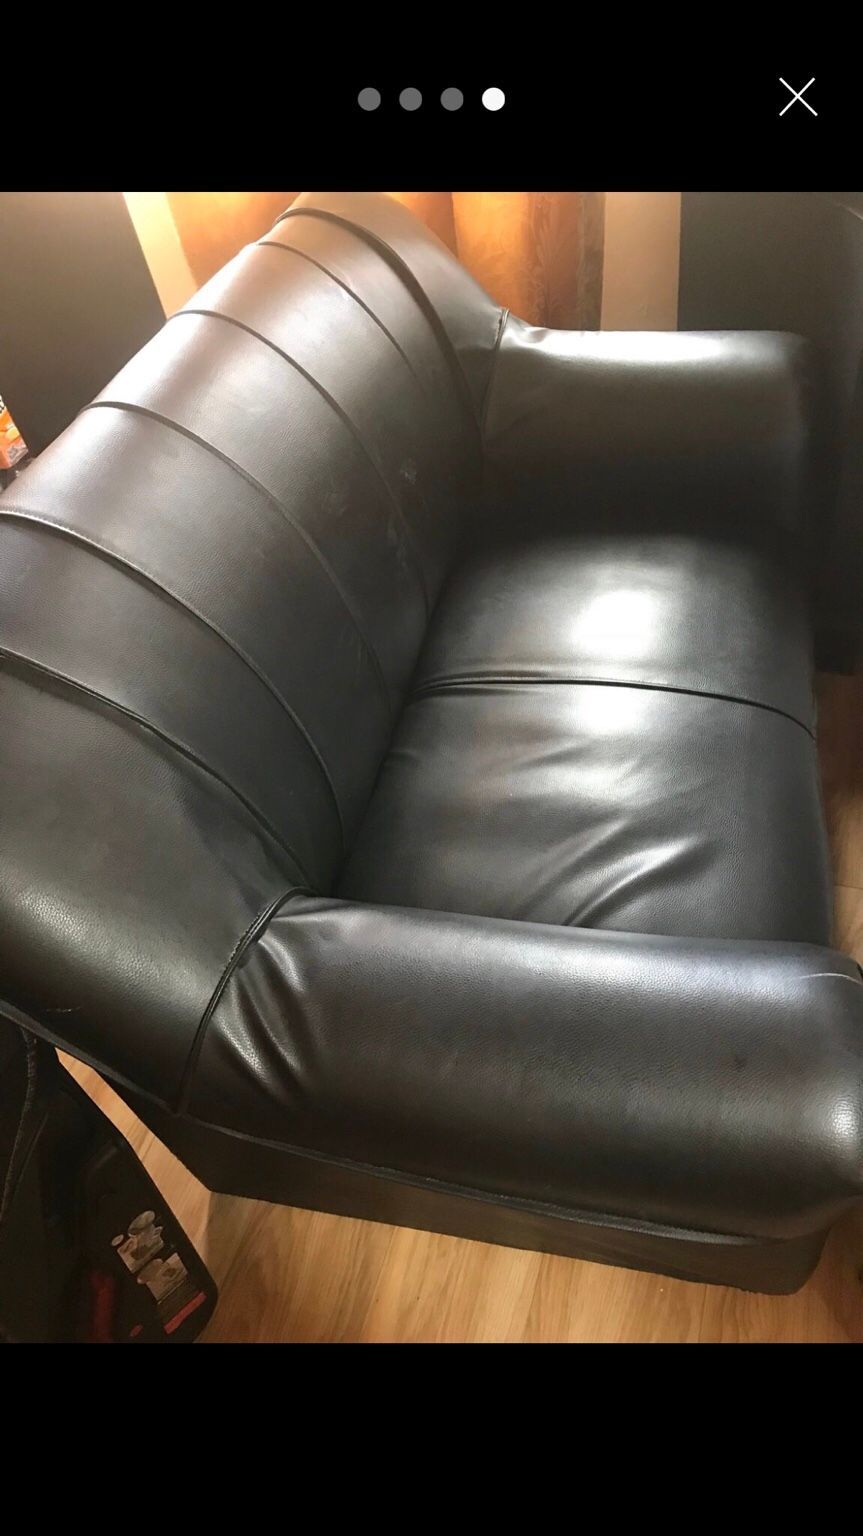 Https://en.shpock/i/w7ckwed7g2nah_fb/ 2018 10 13t22:56:26+ Pertaining To Rogan Leather Cafe Latte Swivel Glider Recliners (Photo 9 of 25)